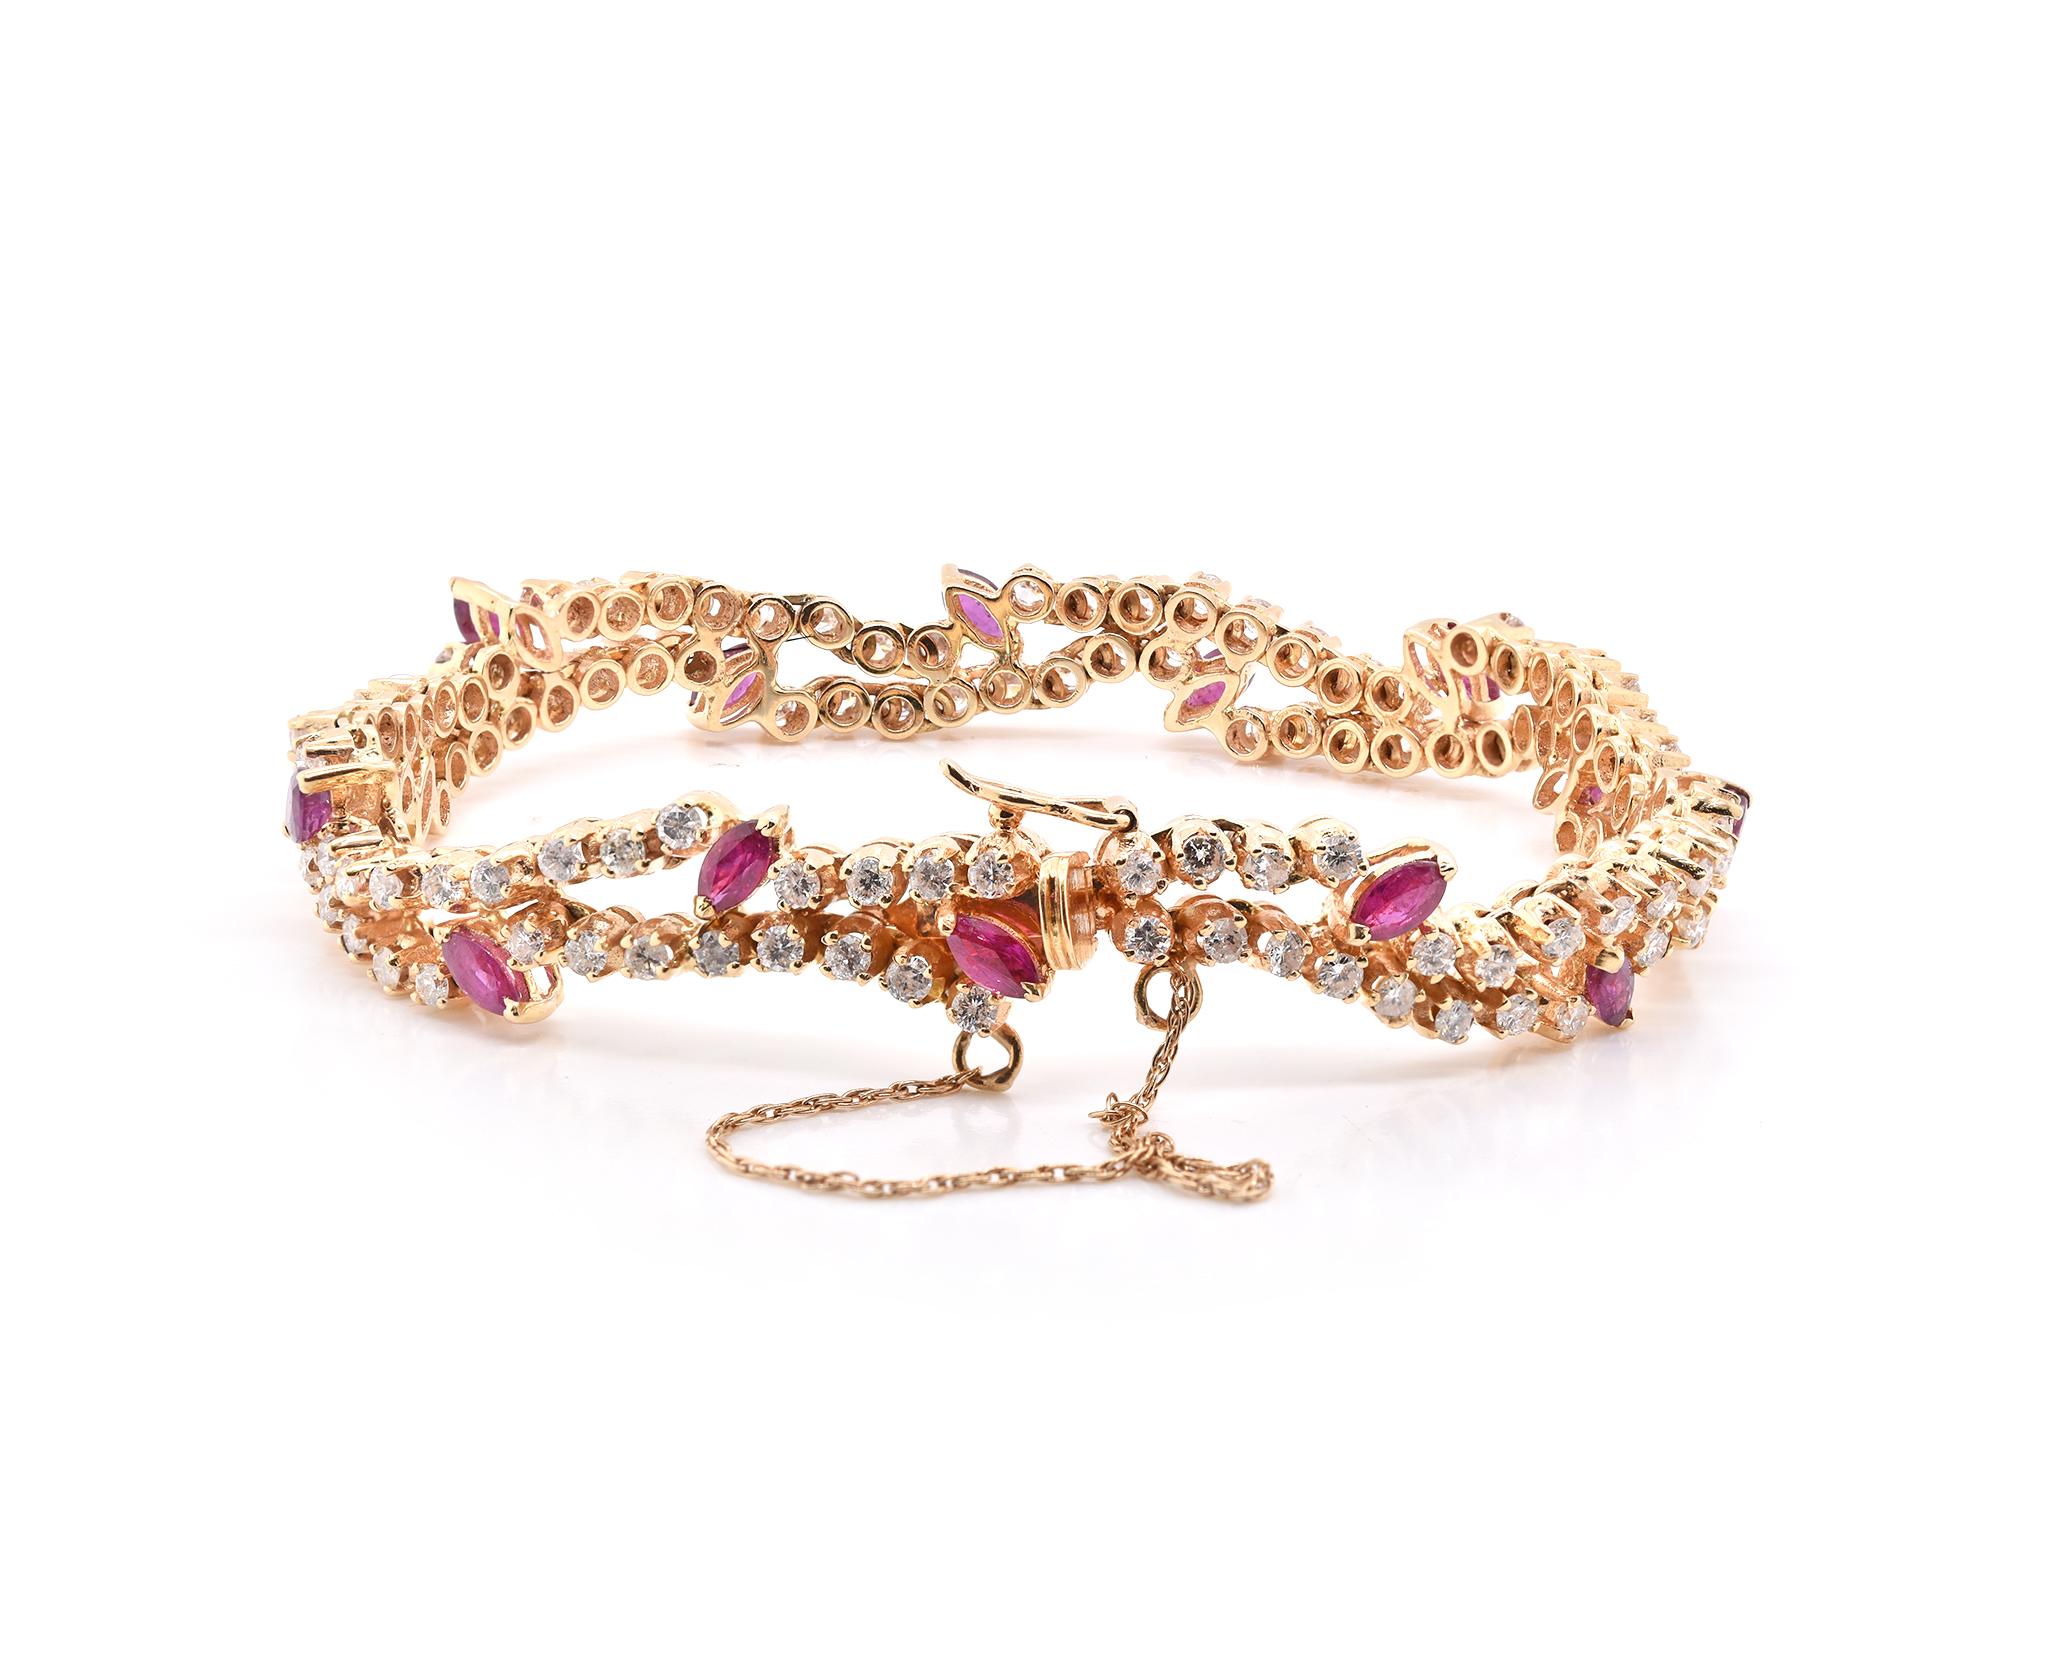 Designer: custom
Material: 14K yellow gold
Ruby: 14 marquise cut = 1.12cttw
Diamond: 110 round cut = 2.75cttw
Color: G
Clarity: SI1
Dimensions: bracelet measures 7.5-inches
Weight: 20.74 grams